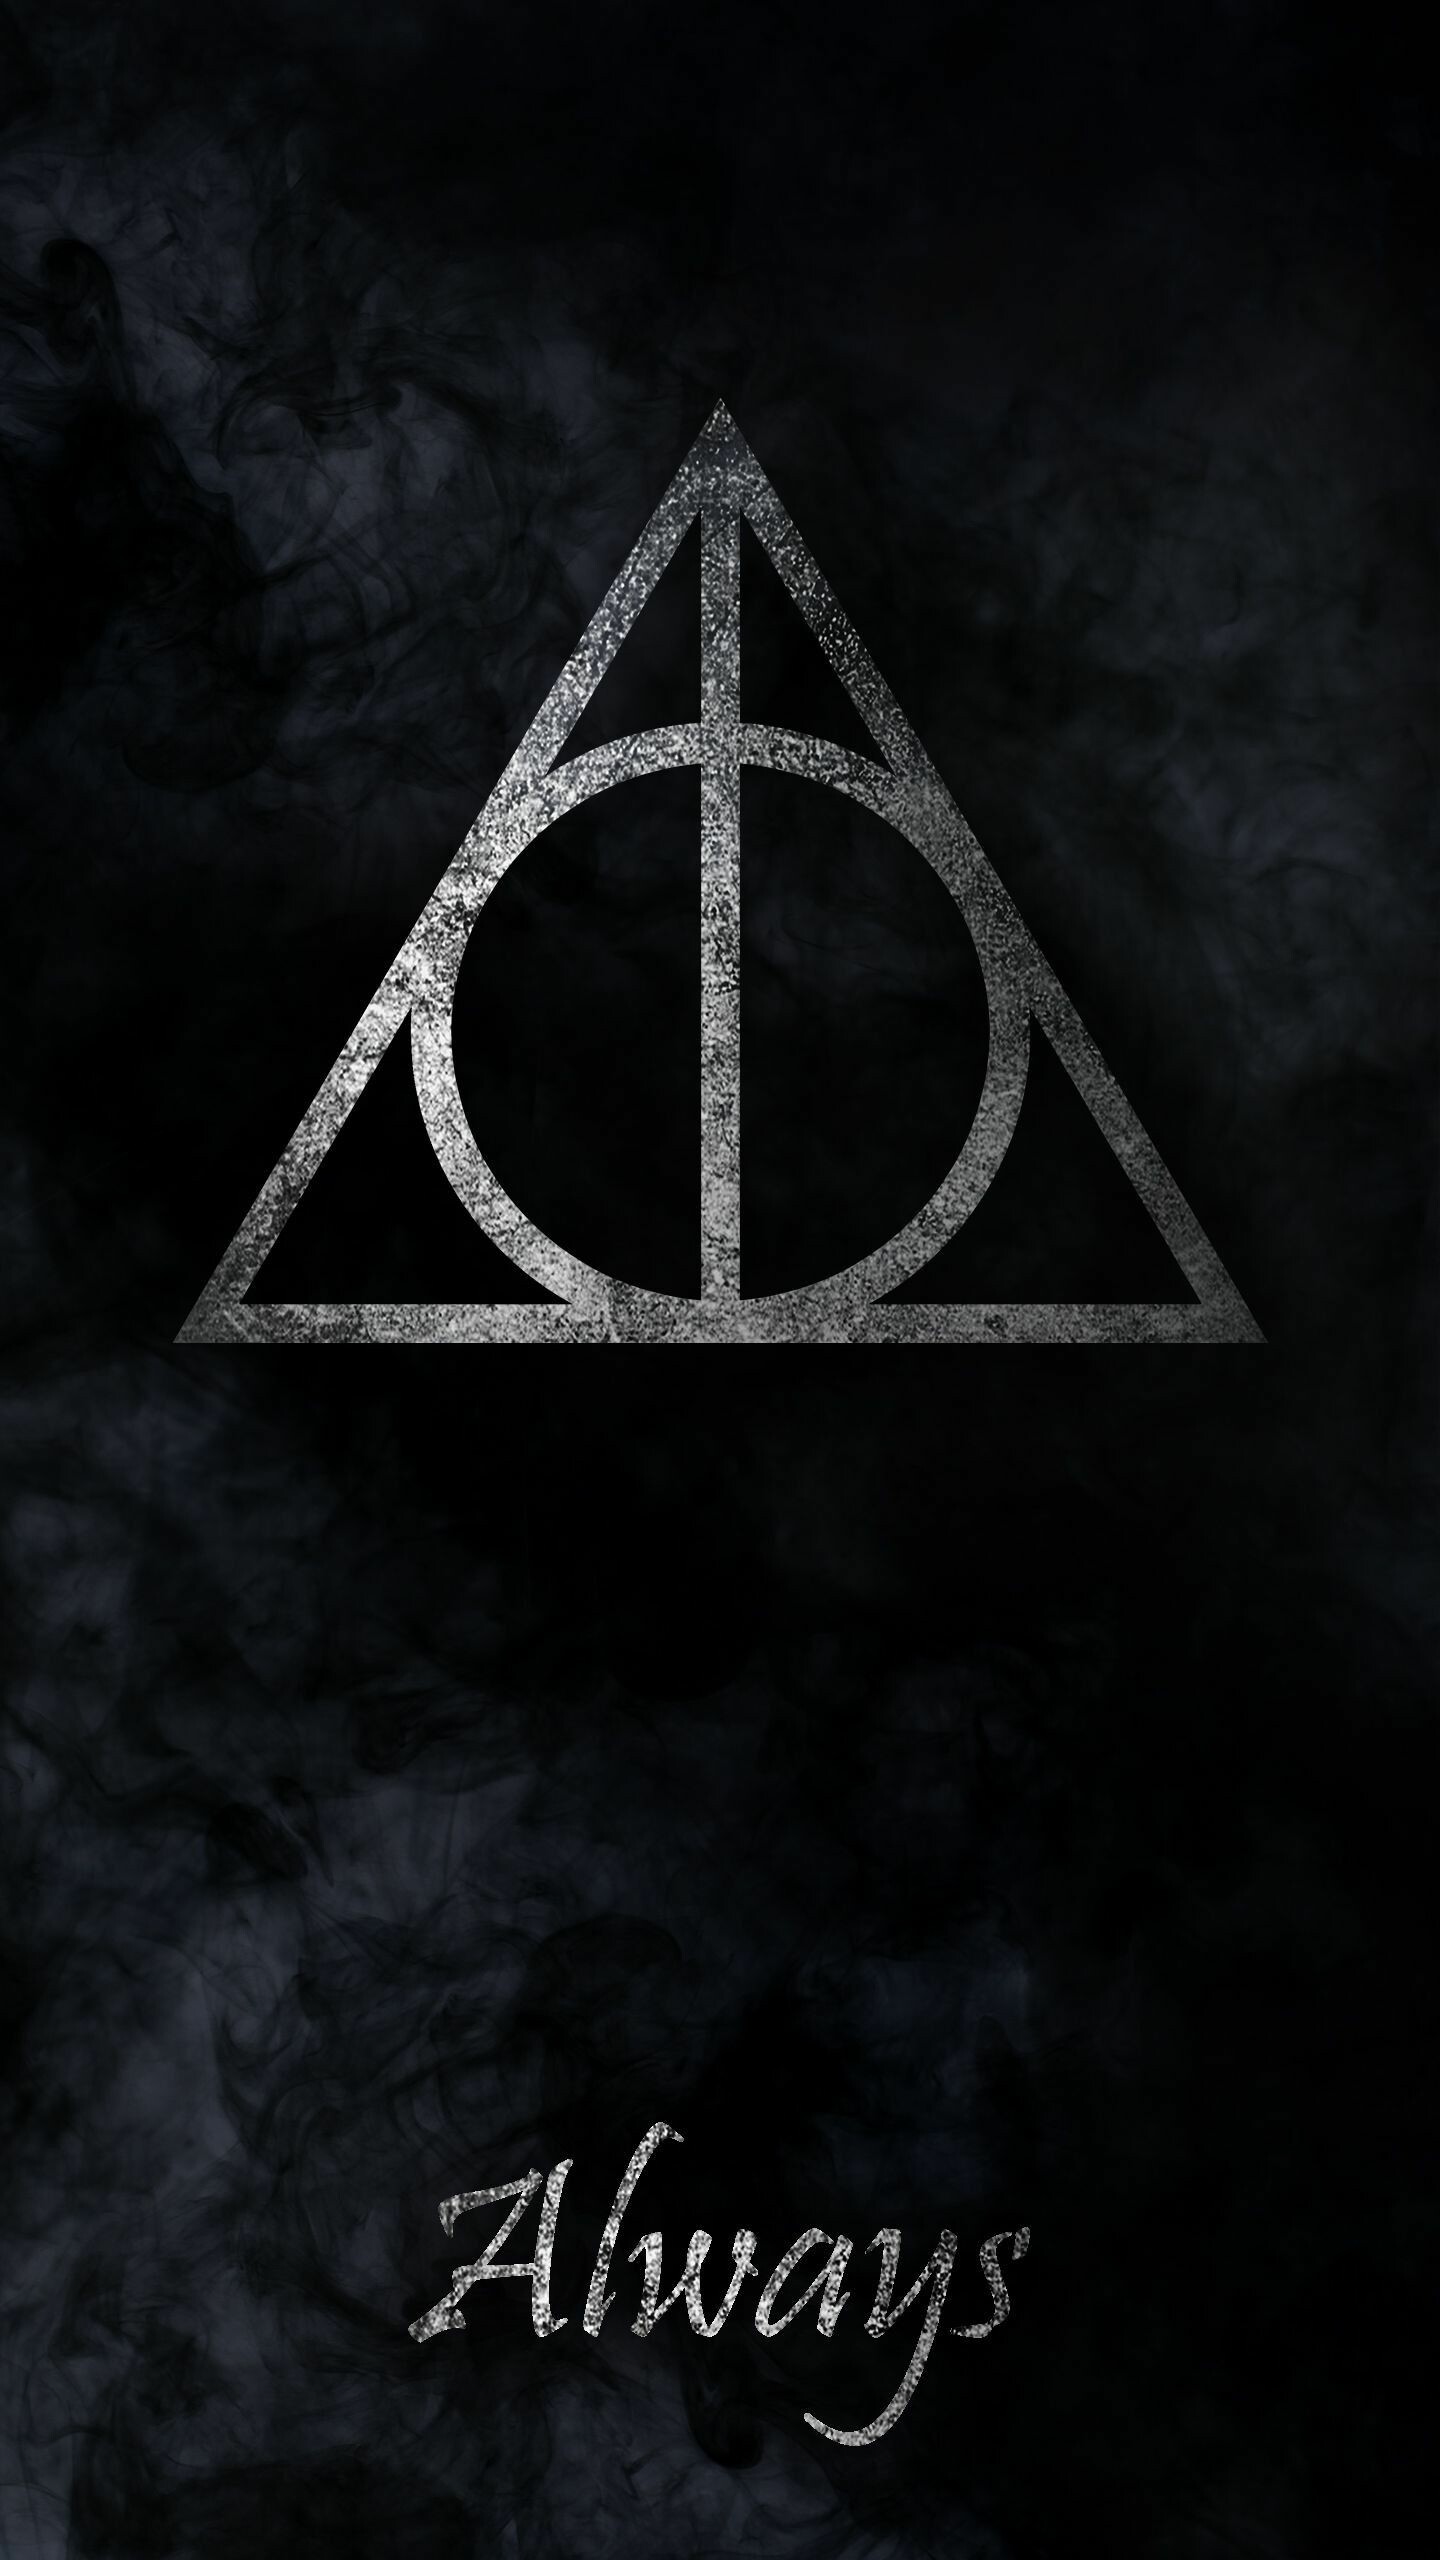 Harry Potter: The original seven books were adapted into an eight-part namesake film series by Warner Bros. Pictures. 1440x2560 HD Background.